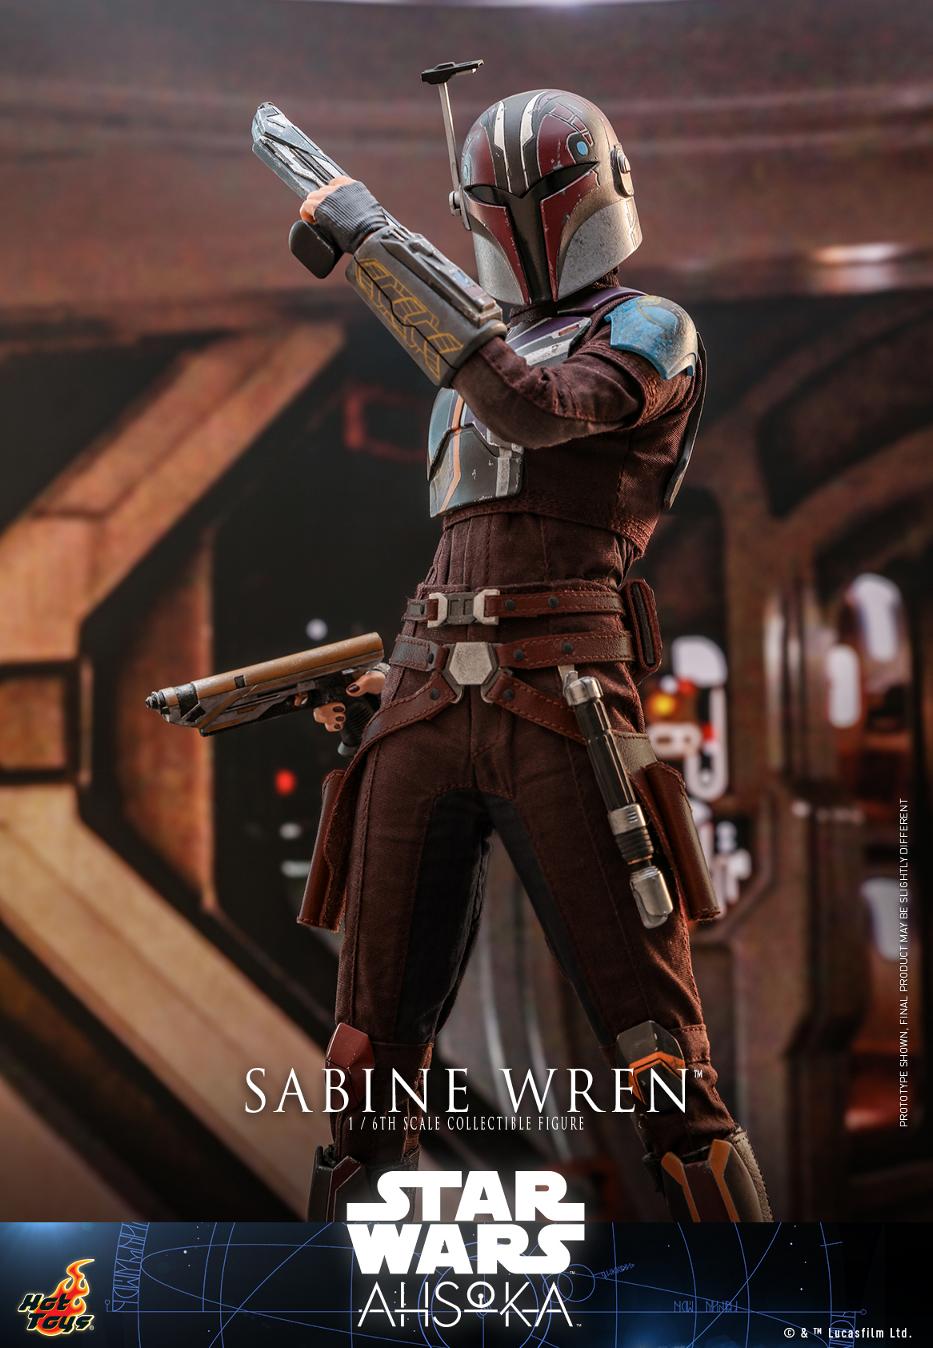 Sabine Wren 1/6th scale collectible figure - Hot Toys Sabine42